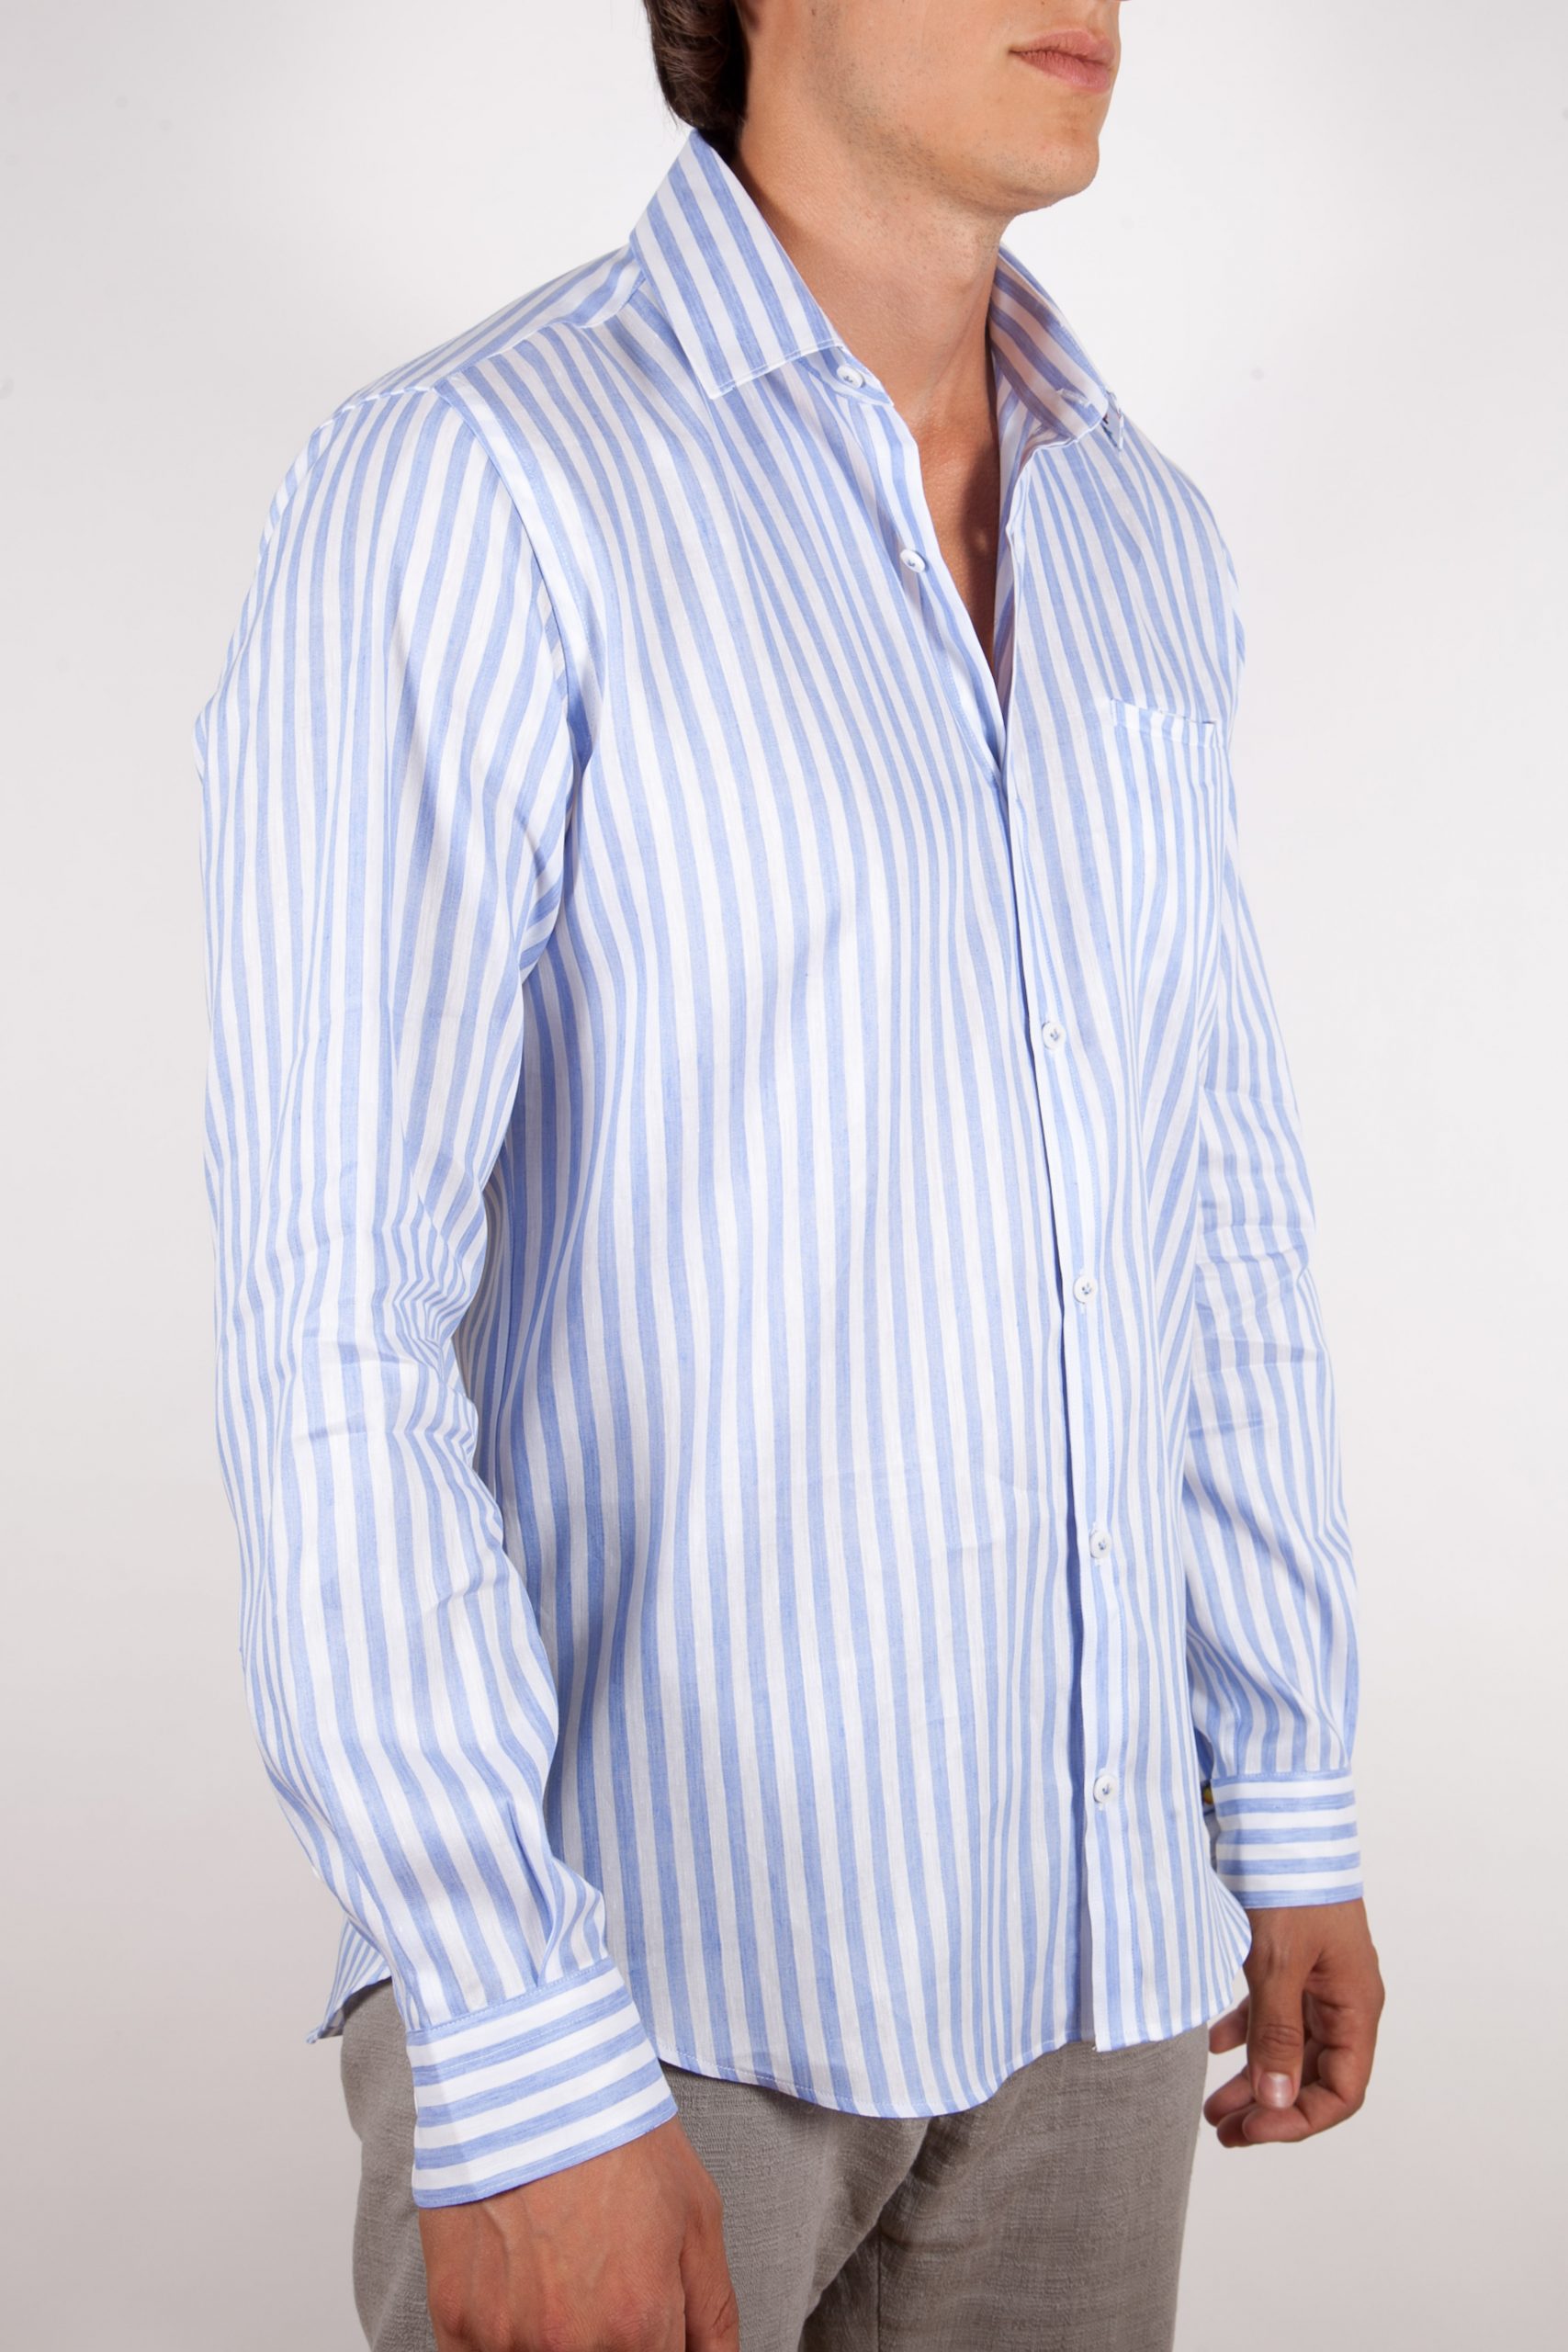 Linen/Cotton Patterned Shirt with Italian Collar - Poggianti camicie